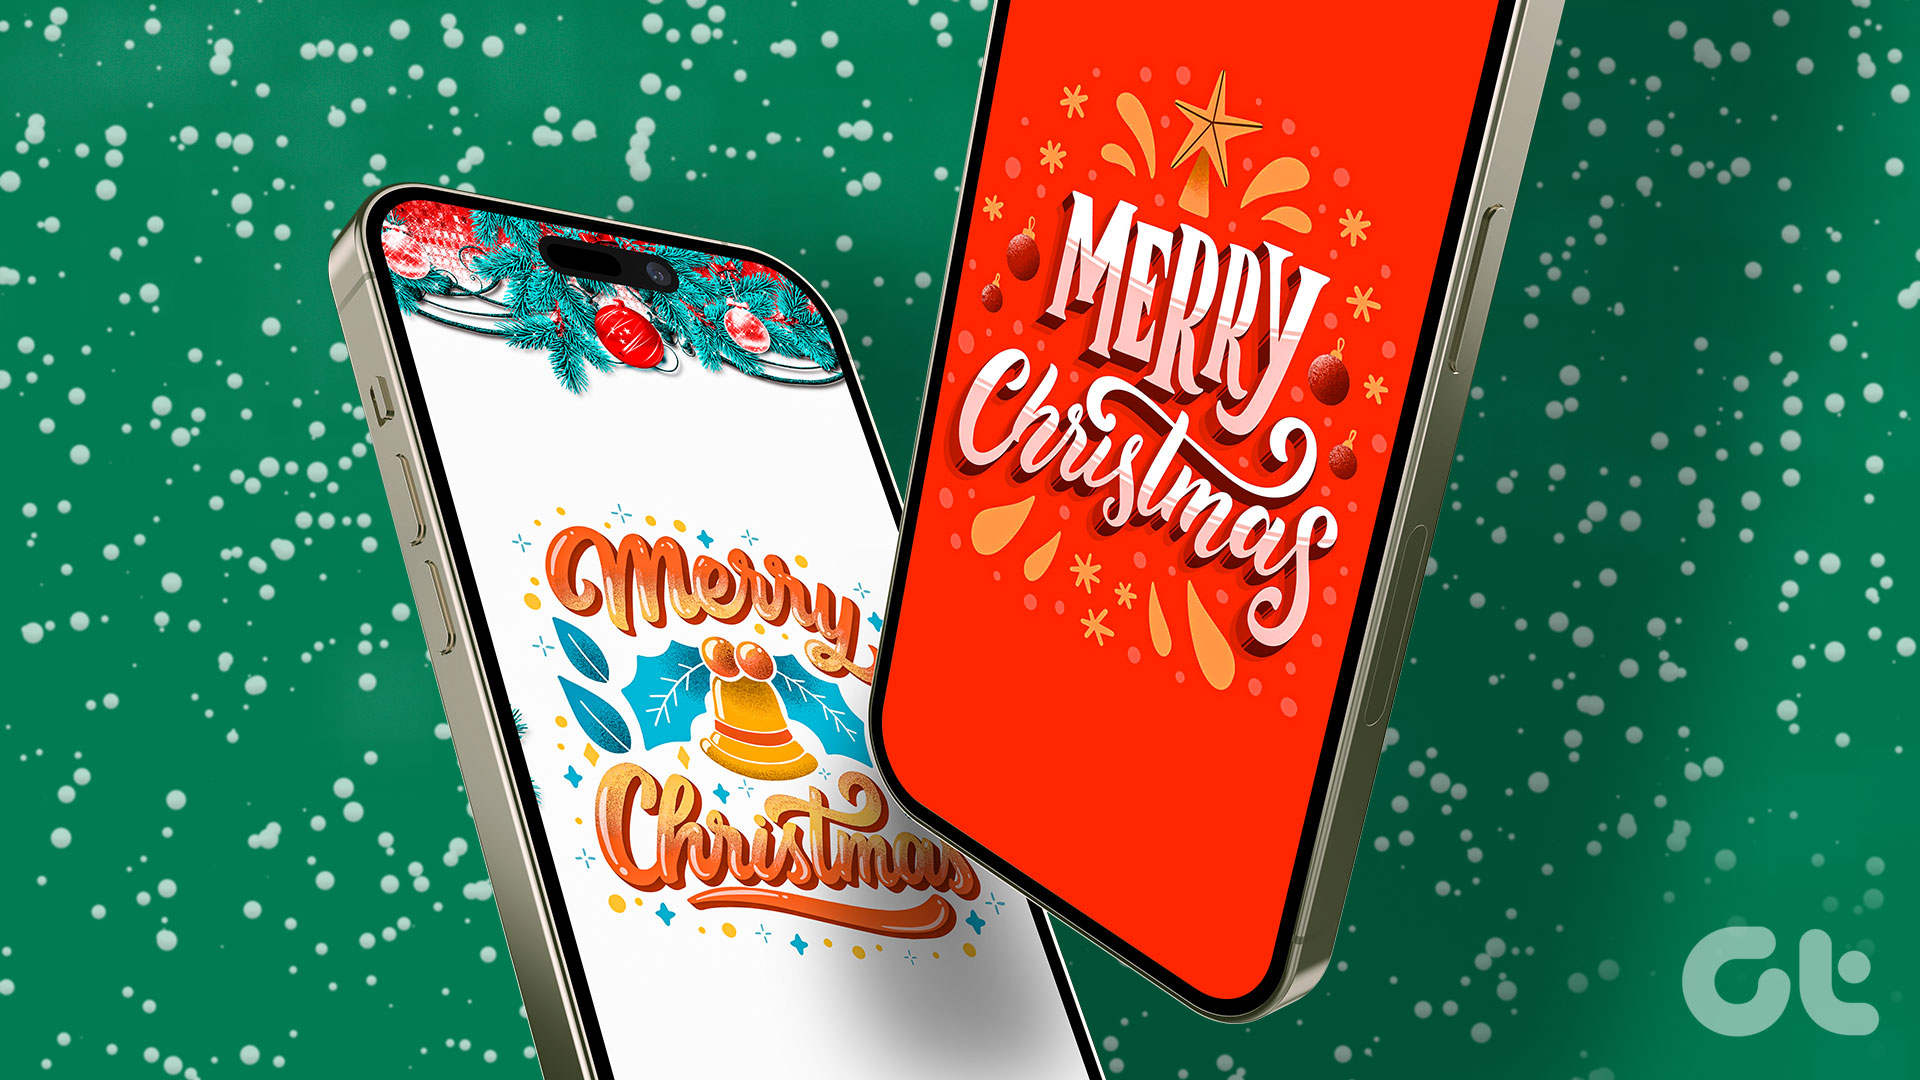 16 Free Christmas Phone Wallpapers - Guiding Tech